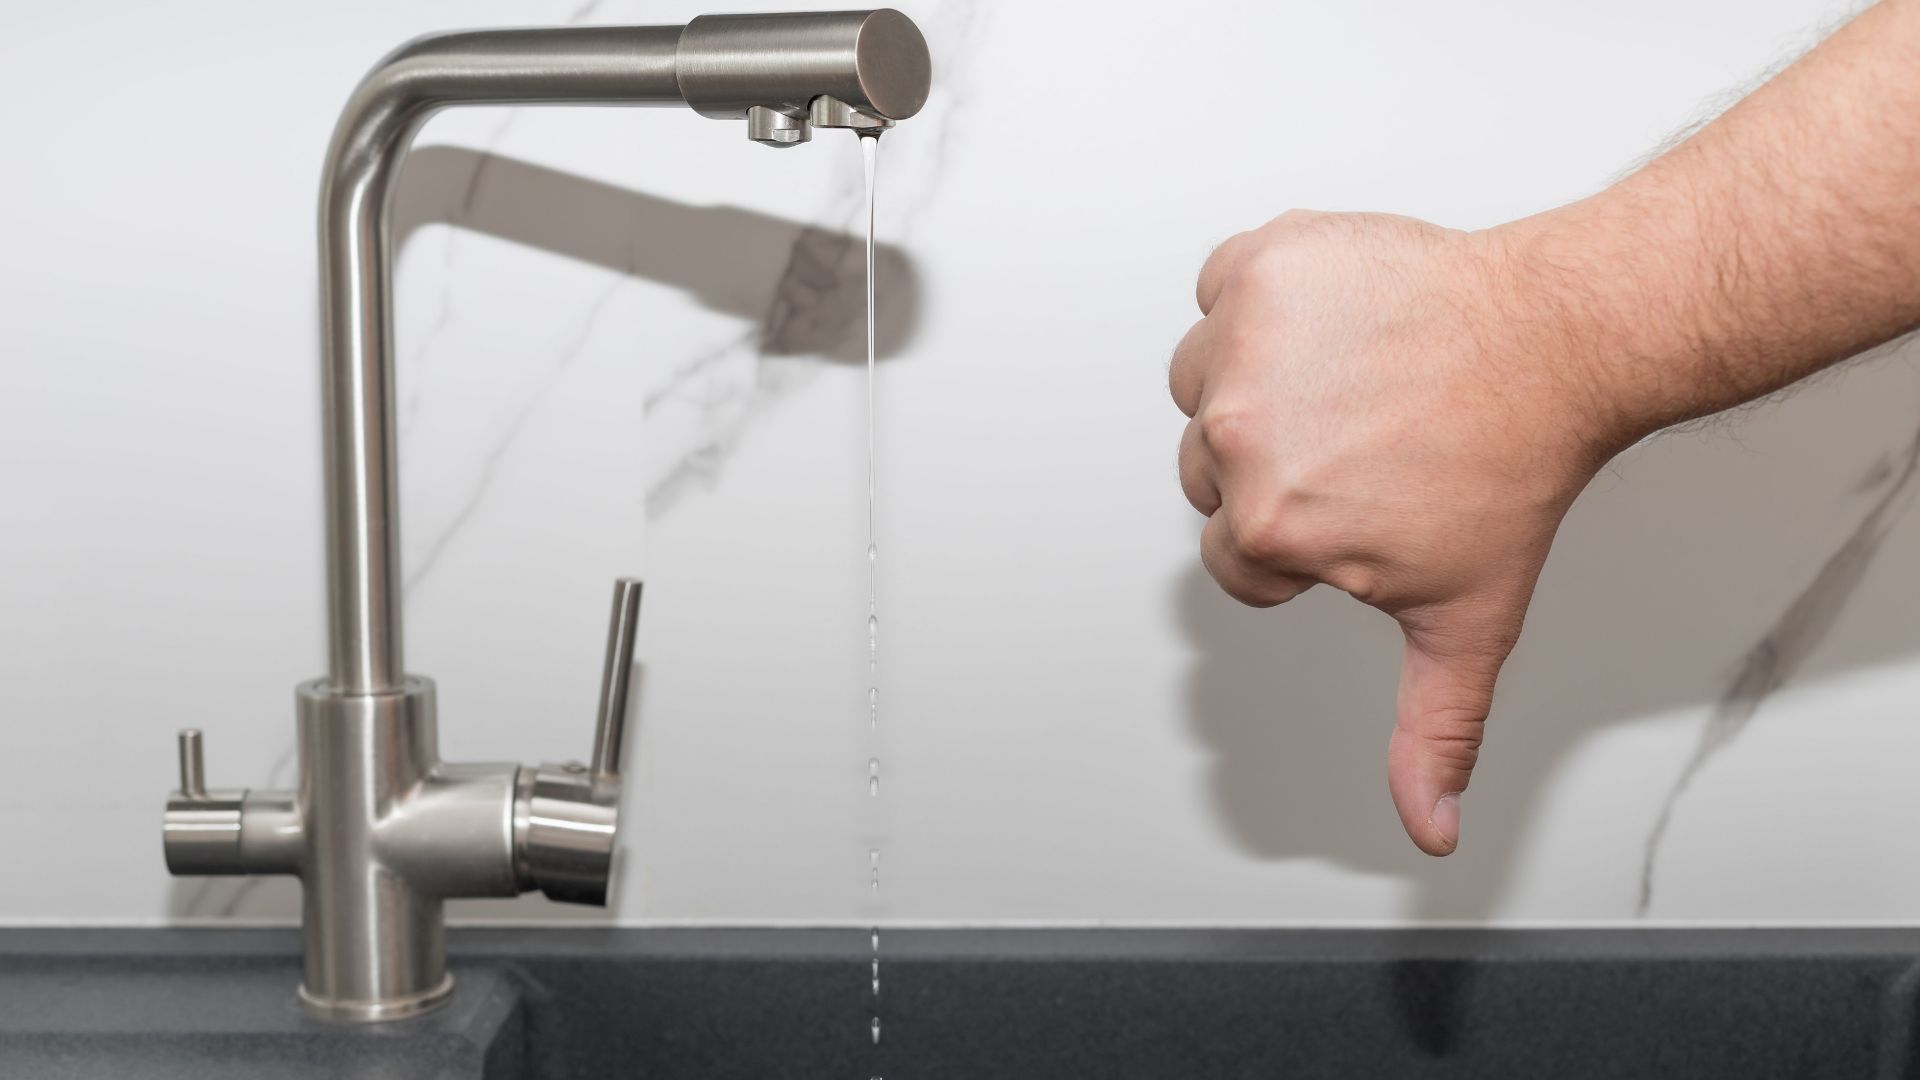 Keep an eye on your water pressure with assistance from expert plumbers.